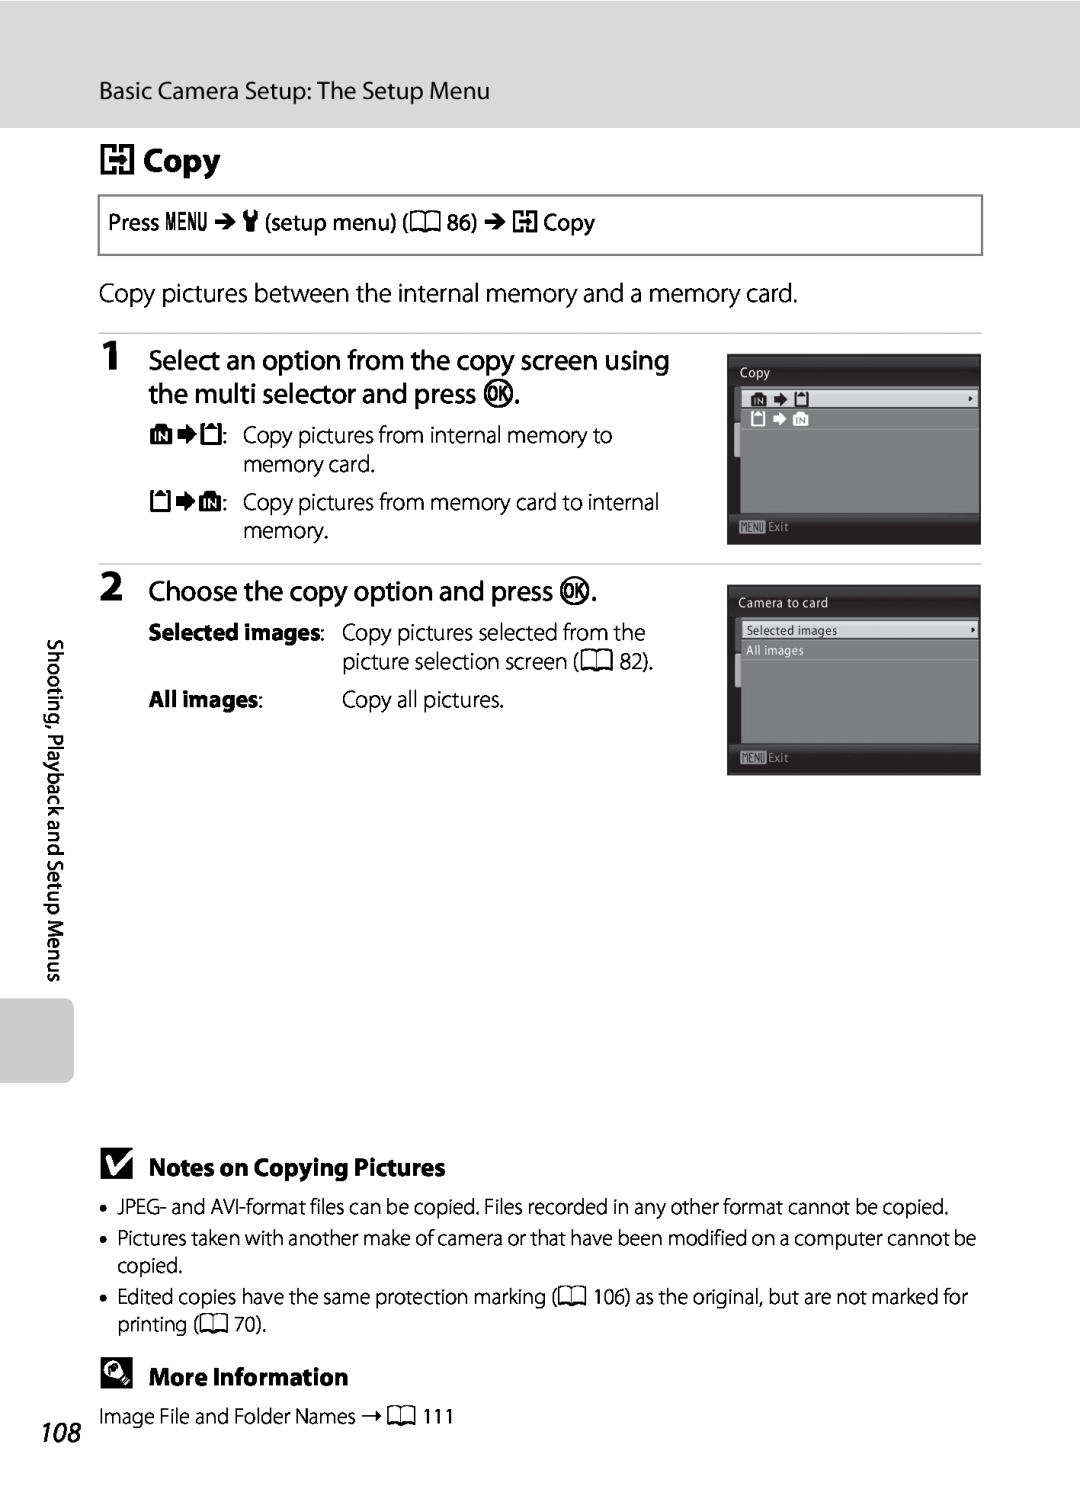 Nikon L21 h Copy, Select an option from the copy screen using, the multi selector and press k, B Notes on Copying Pictures 